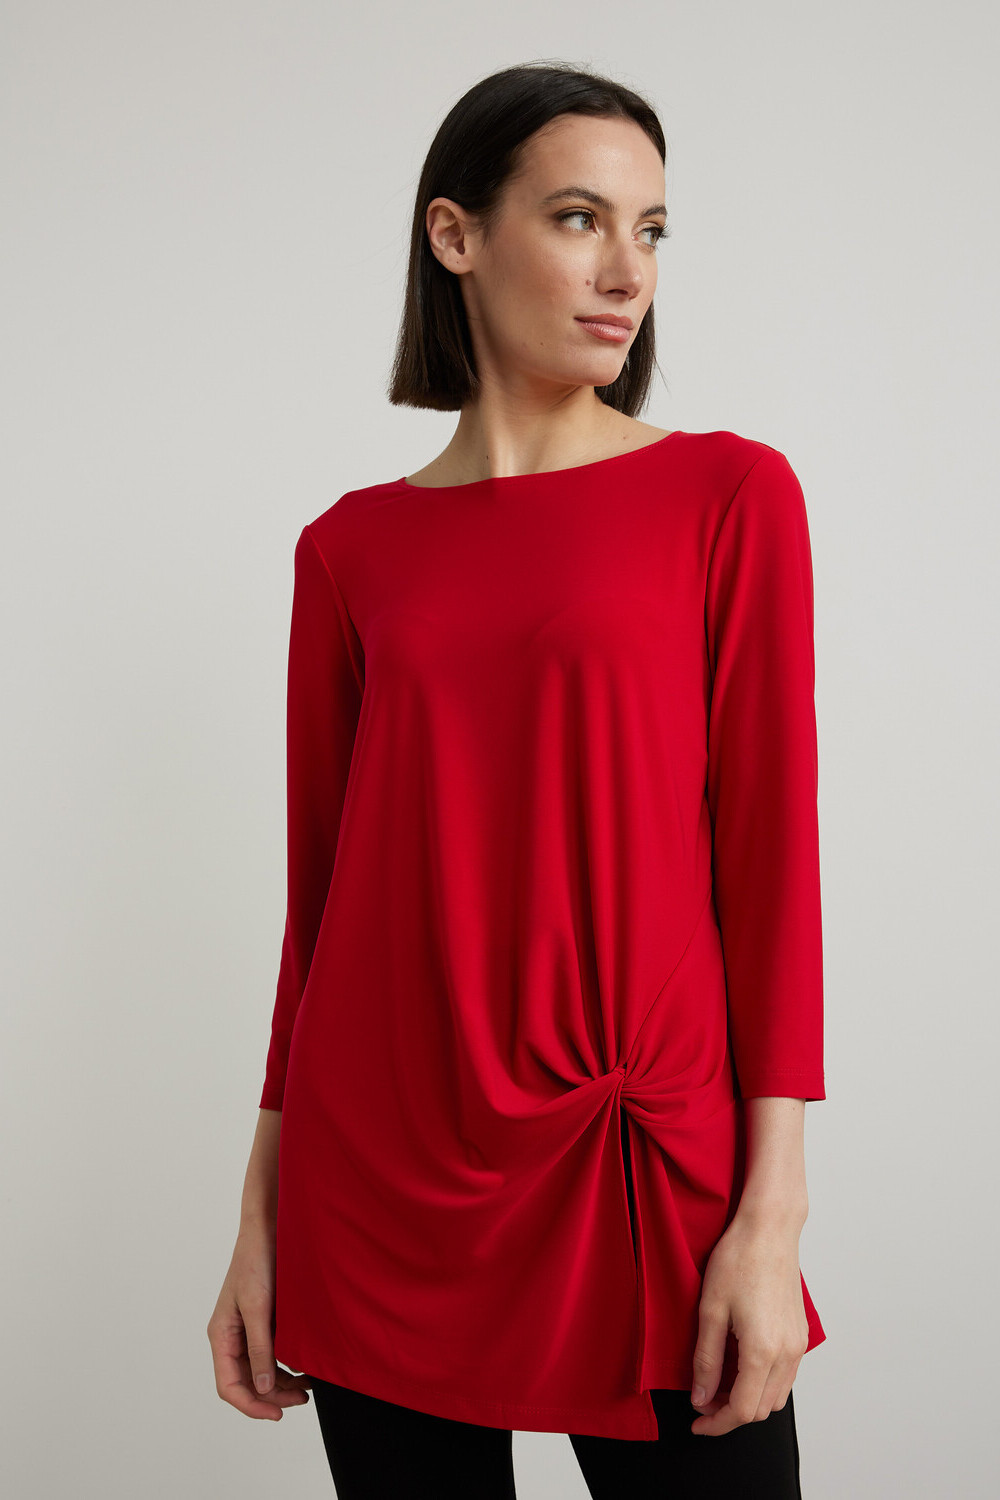 Joseph Ribkoff Knotted Front Top Style 213584. Lipstick Red 173